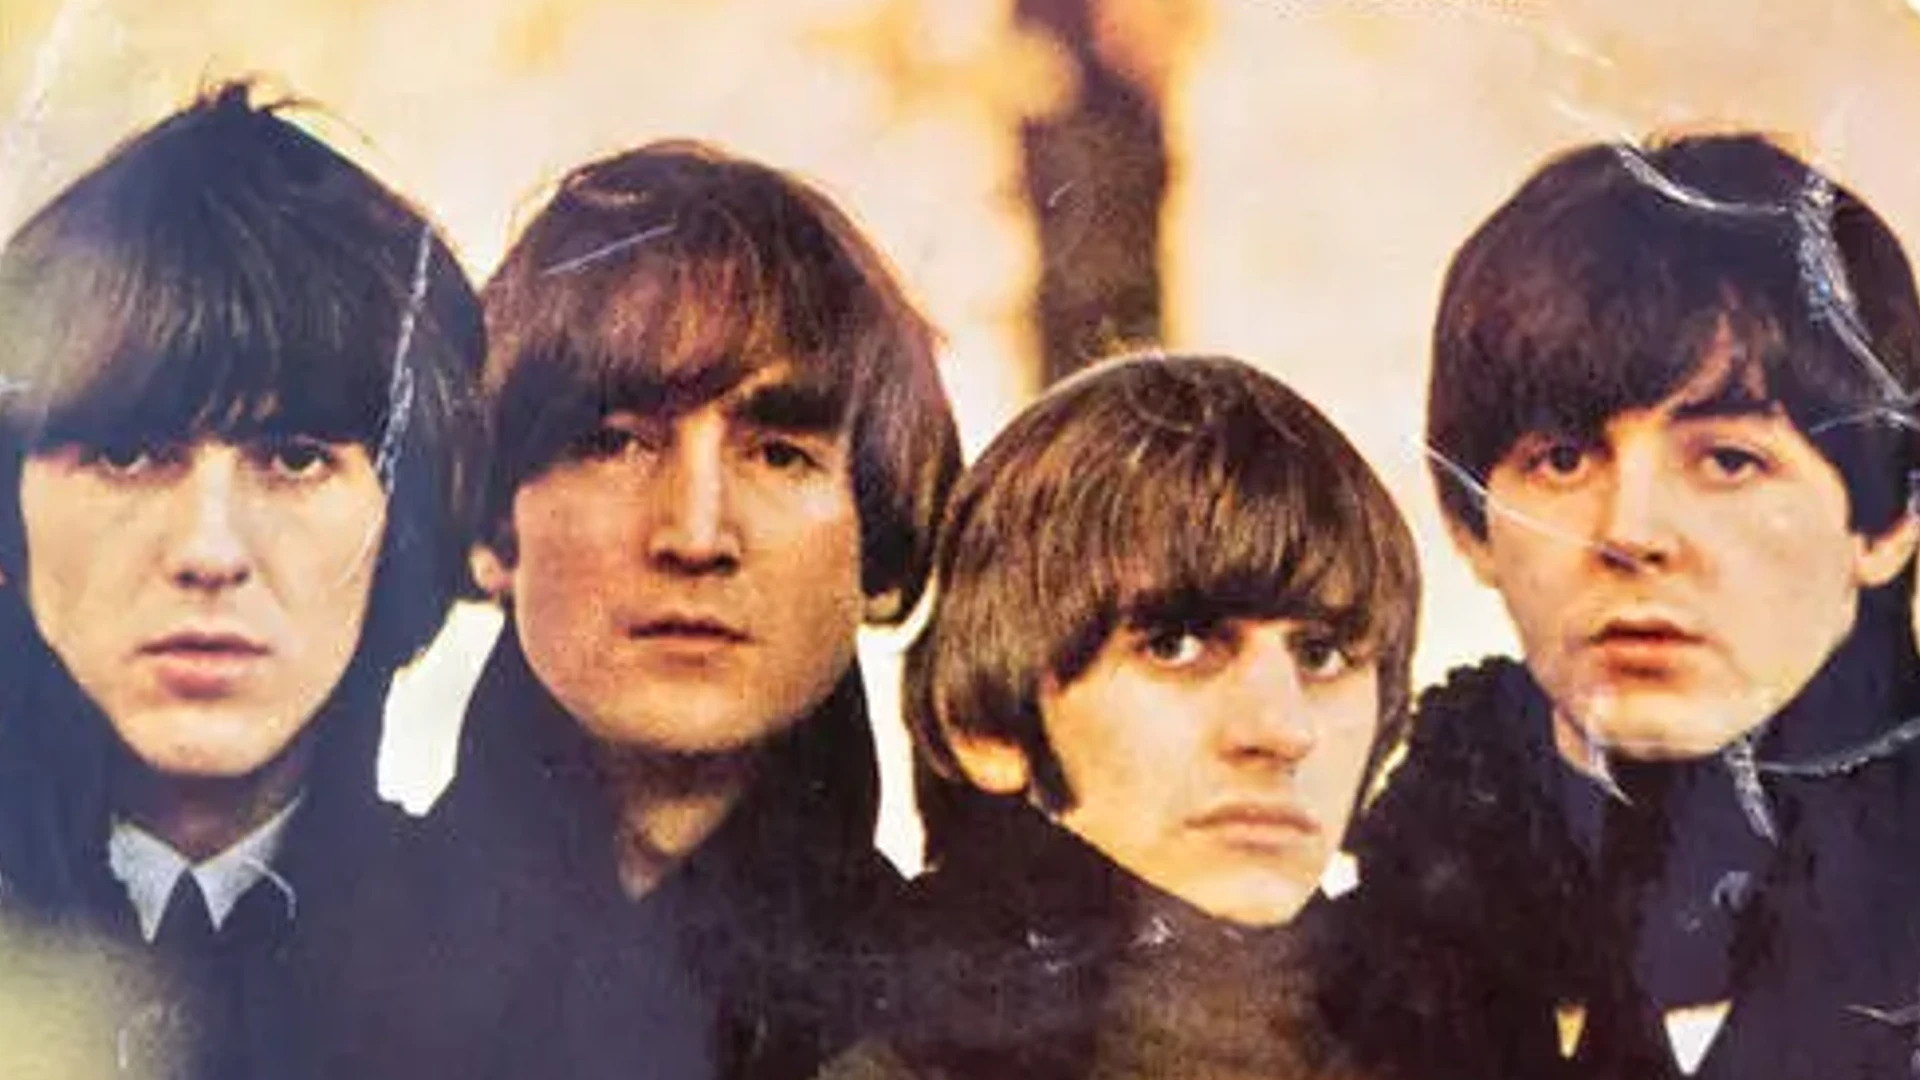 Music History Collection of the Beatles and John Lennon to be Auctioned as NFTs